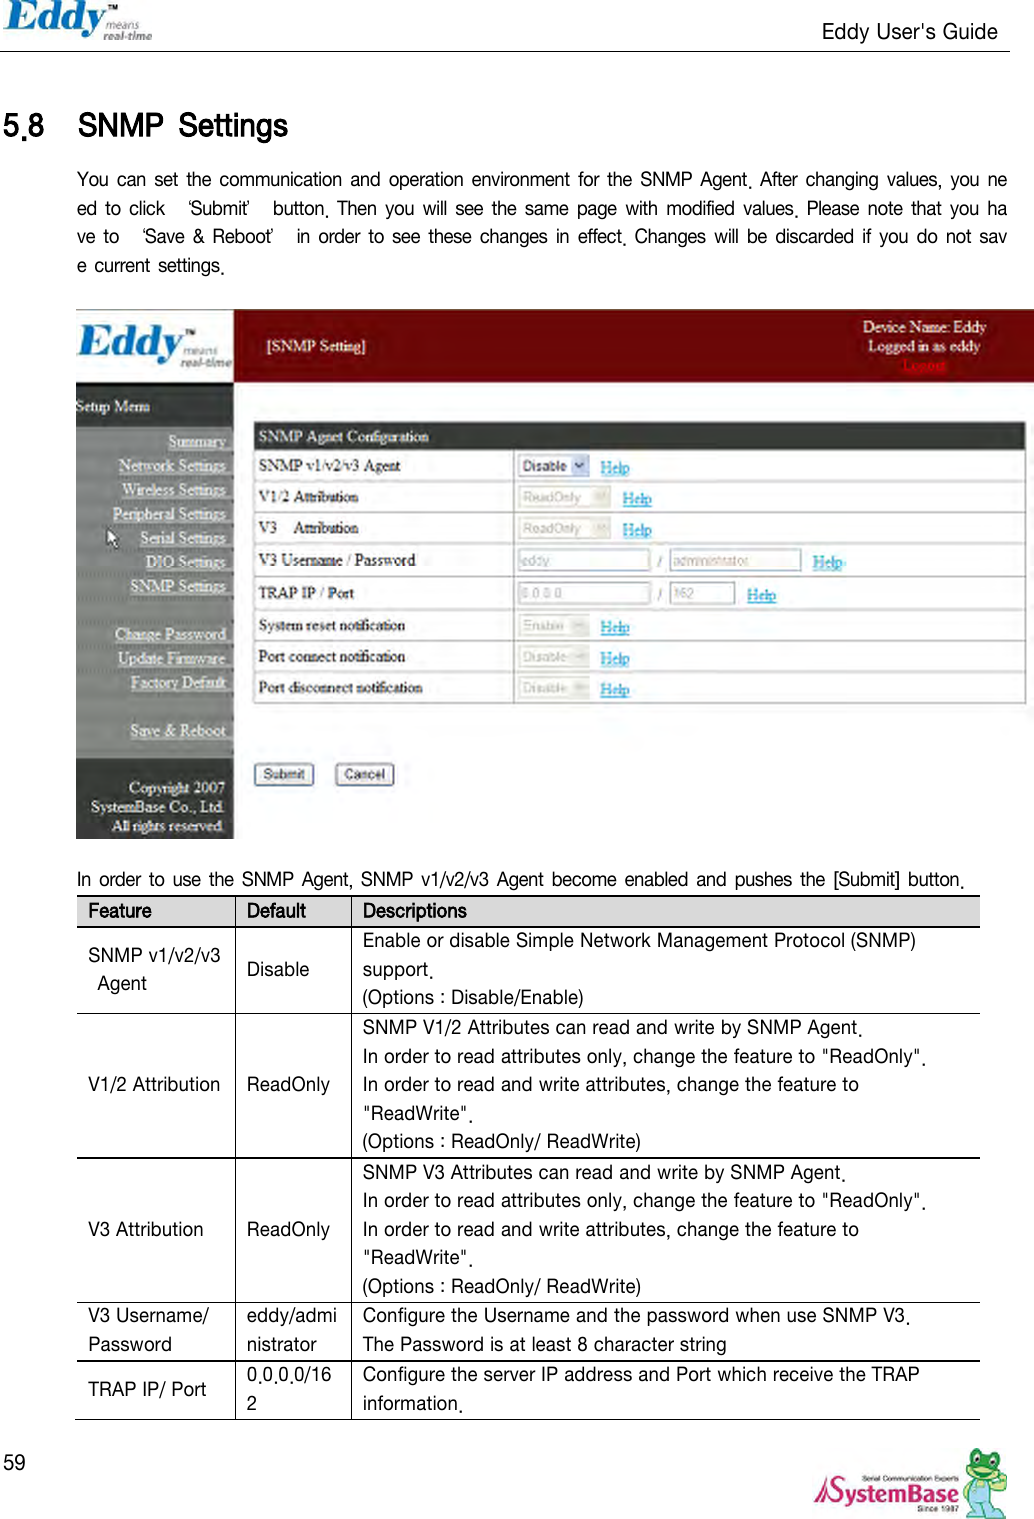                                                                   Eddy User&apos;s Guide   59  5.8 SNMP  Settings You can set the communication  and operation environment for the SNMP Agent. After  changing values, you need  to  click  ‘Submit’  button.  Then  you will see  the  same  page  with  modified  values. Please note  that  you have to  ‘Save &amp; Reboot’ in  order  to  see these changes in  effect. Changes will  be  discarded if  you do not save current settings.    In order to  use the SNMP  Agent, SNMP v1/v2/v3  Agent  become enabled  and  pushes the [Submit] button.   Feature Default Descriptions SNMP v1/v2/v3   Agent Disable Enable or disable Simple Network Management Protocol (SNMP) support. (Options : Disable/Enable) V1/2 Attribution   ReadOnly SNMP V1/2 Attributes can read and write by SNMP Agent.   In order to read attributes only, change the feature to &quot;ReadOnly&quot;. In order to read and write attributes, change the feature to &quot;ReadWrite&quot;. (Options : ReadOnly/ ReadWrite) V3 Attribution ReadOnly SNMP V3 Attributes can read and write by SNMP Agent.   In order to read attributes only, change the feature to &quot;ReadOnly&quot;. In order to read and write attributes, change the feature to &quot;ReadWrite&quot;. (Options : ReadOnly/ ReadWrite) V3 Username/ Password eddy/administrator Configure the Username and the password when use SNMP V3. The Password is at least 8 character string TRAP IP/ Port 0.0.0.0/162 Configure the server IP address and Port which receive the TRAP information. 